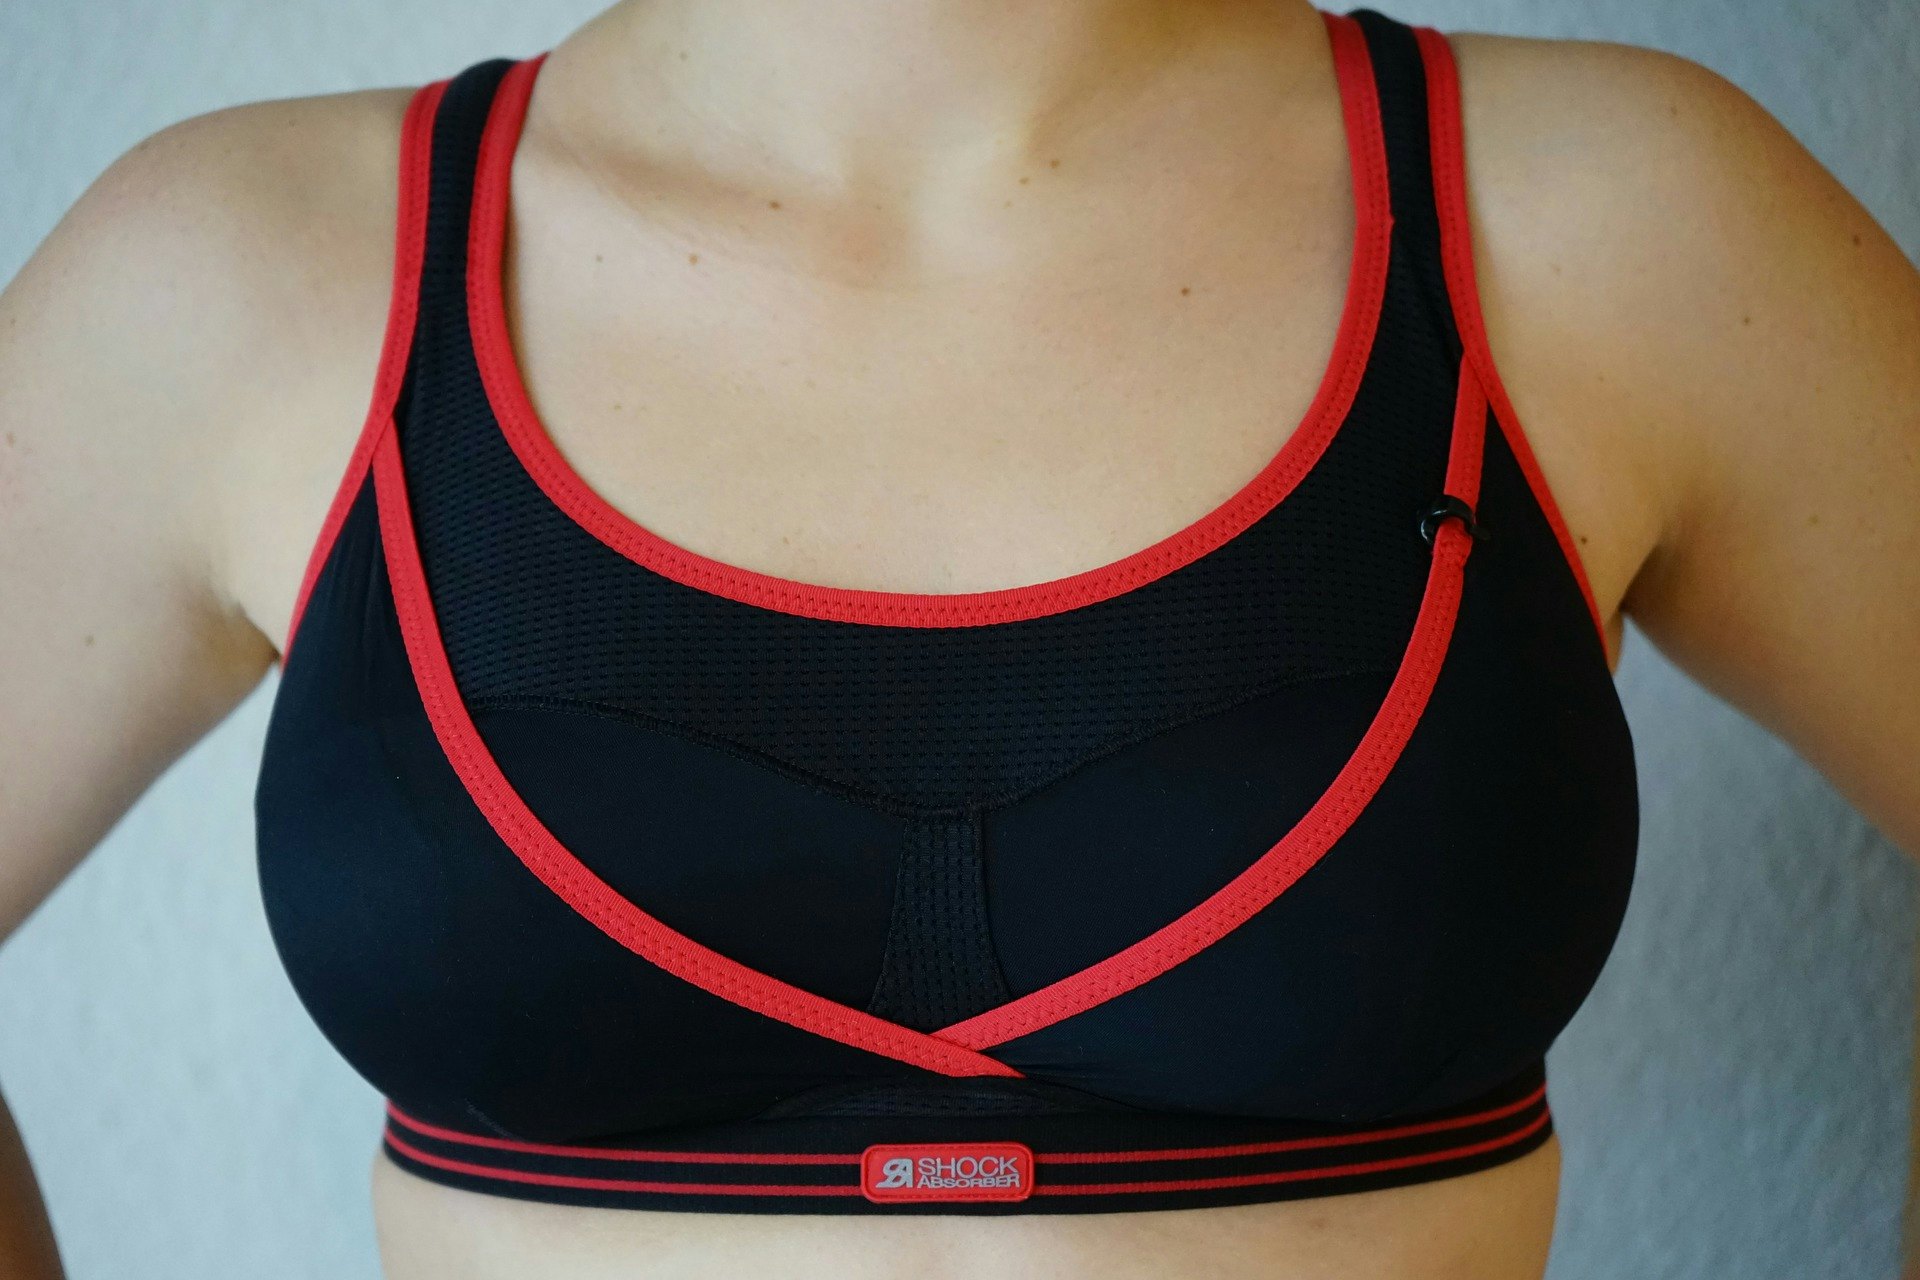 Can A Sports Bra Dry Up Your Milk? A Lactation Consultant Explains